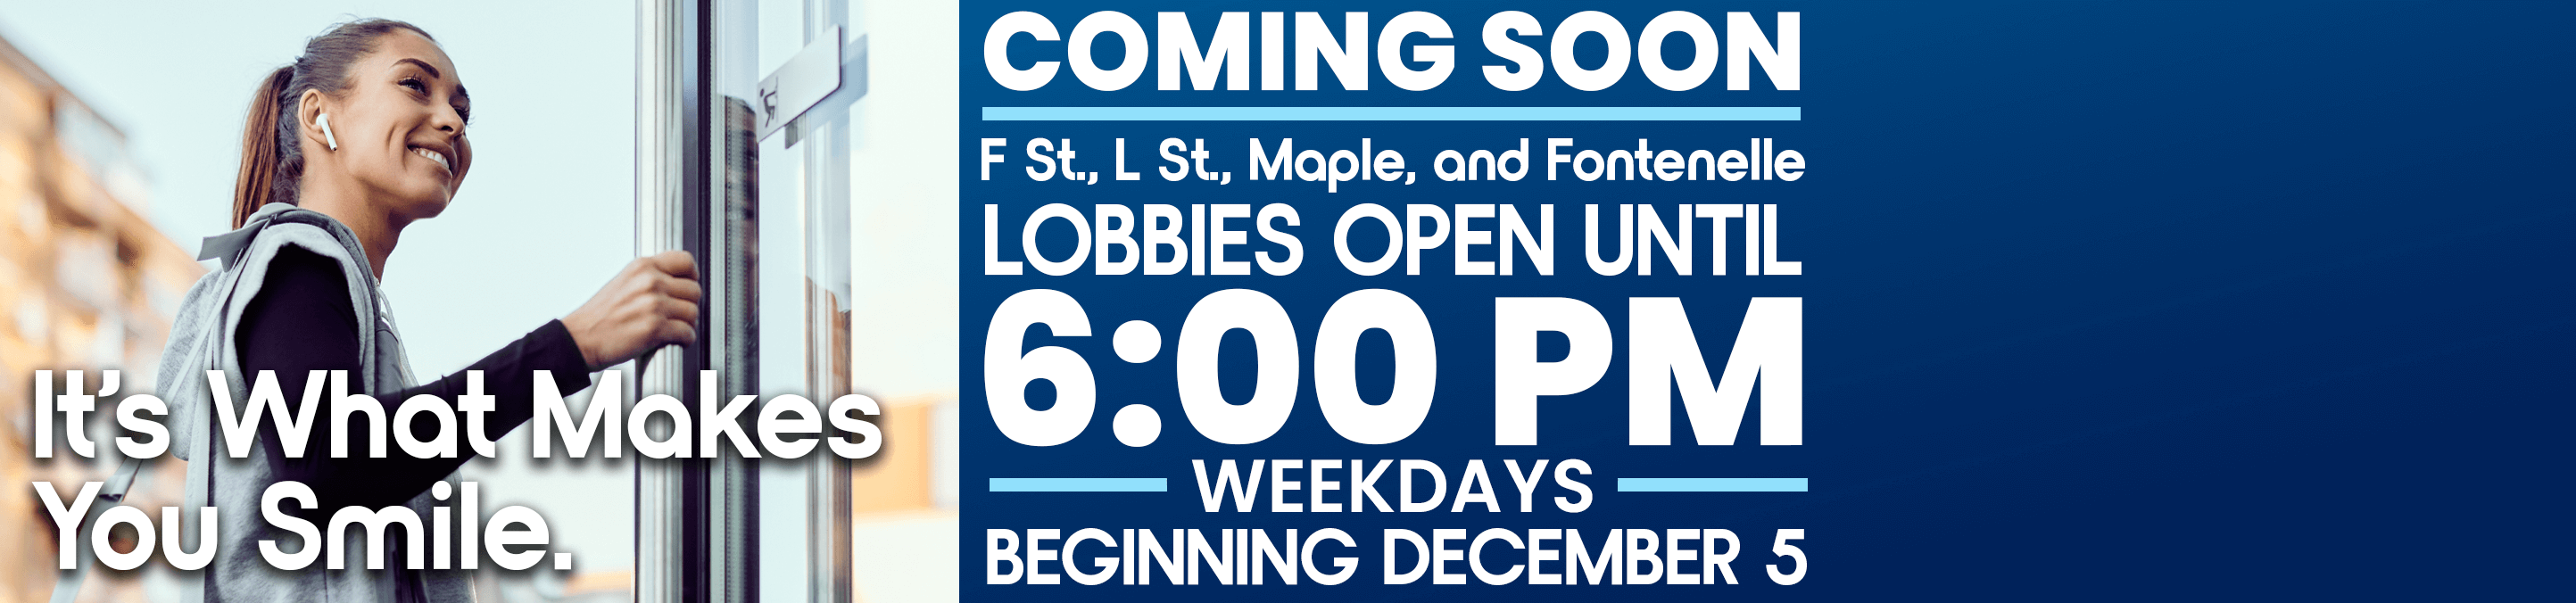 Beginning December 5th our F St., L St., Maple & Fontenelle lobbies will be open until 6:00 p.m. 